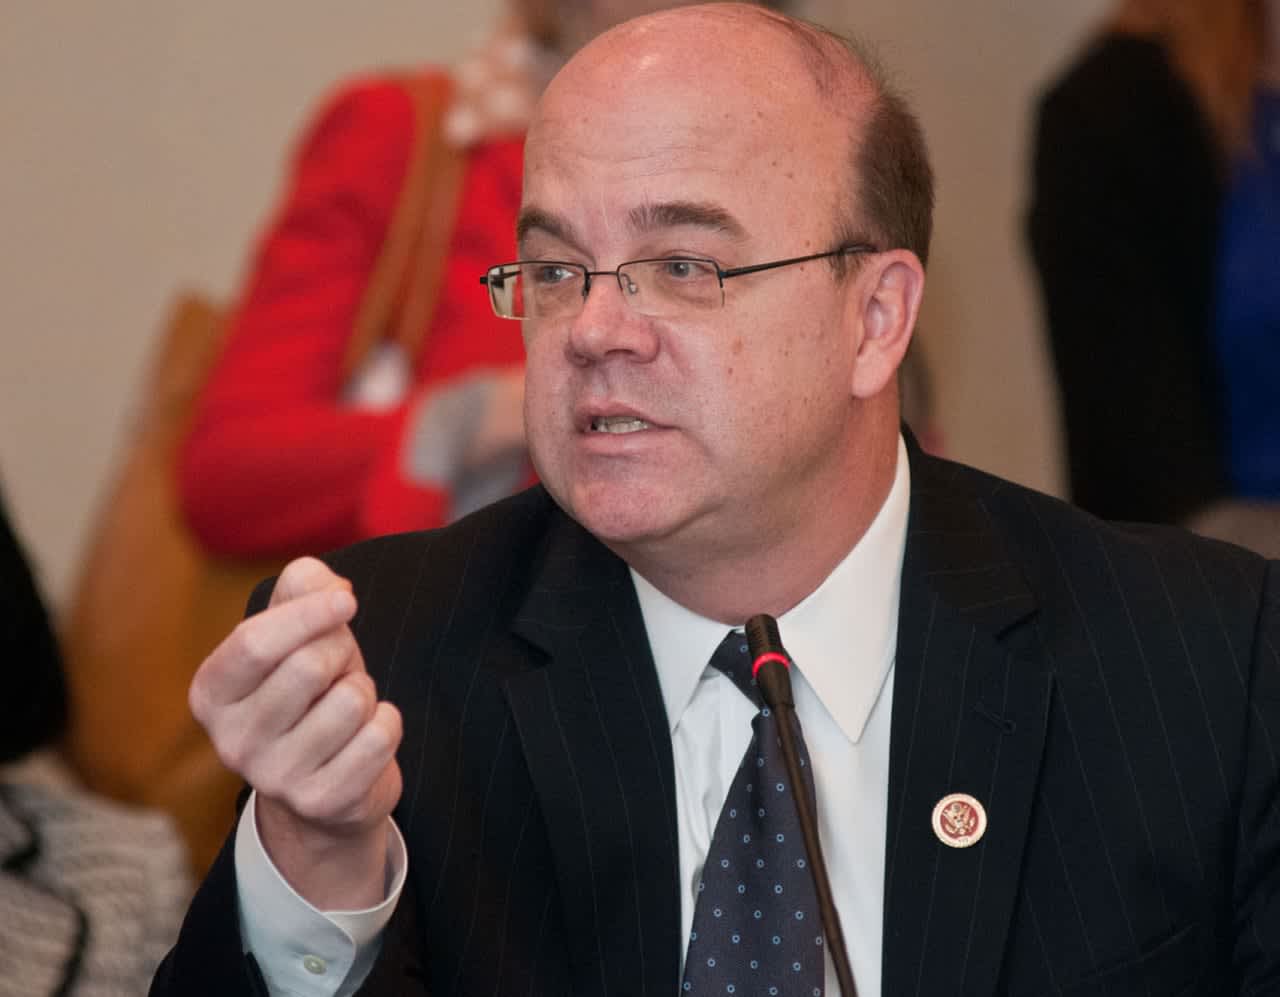 U.S. Rep. for the 2nd District Massachusetts Jim McGovern is calling for the resignation of the postmaster general.